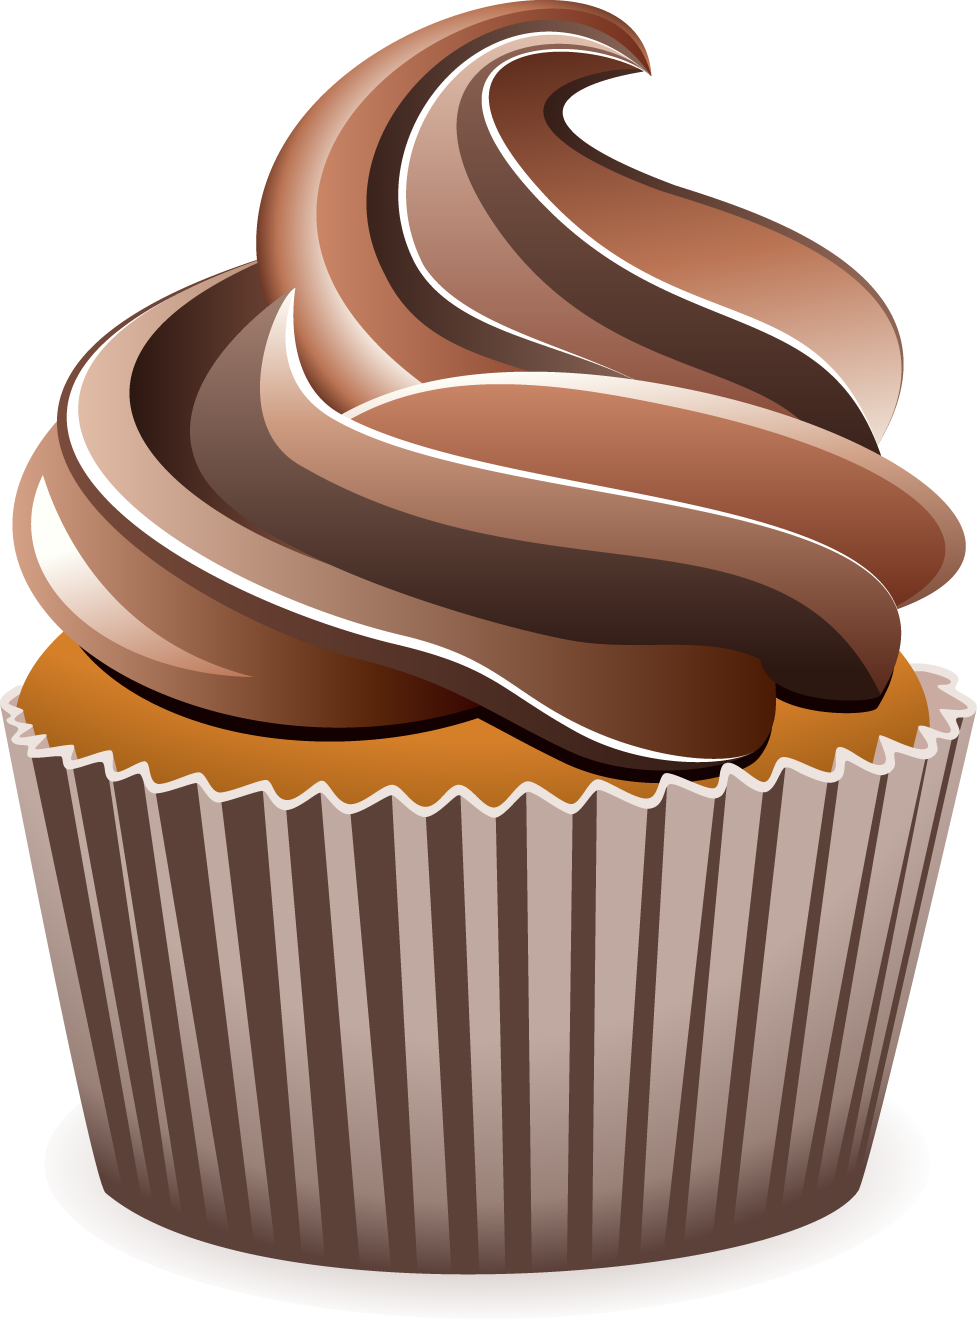 Cupcake Download Images Hd Image Clipart